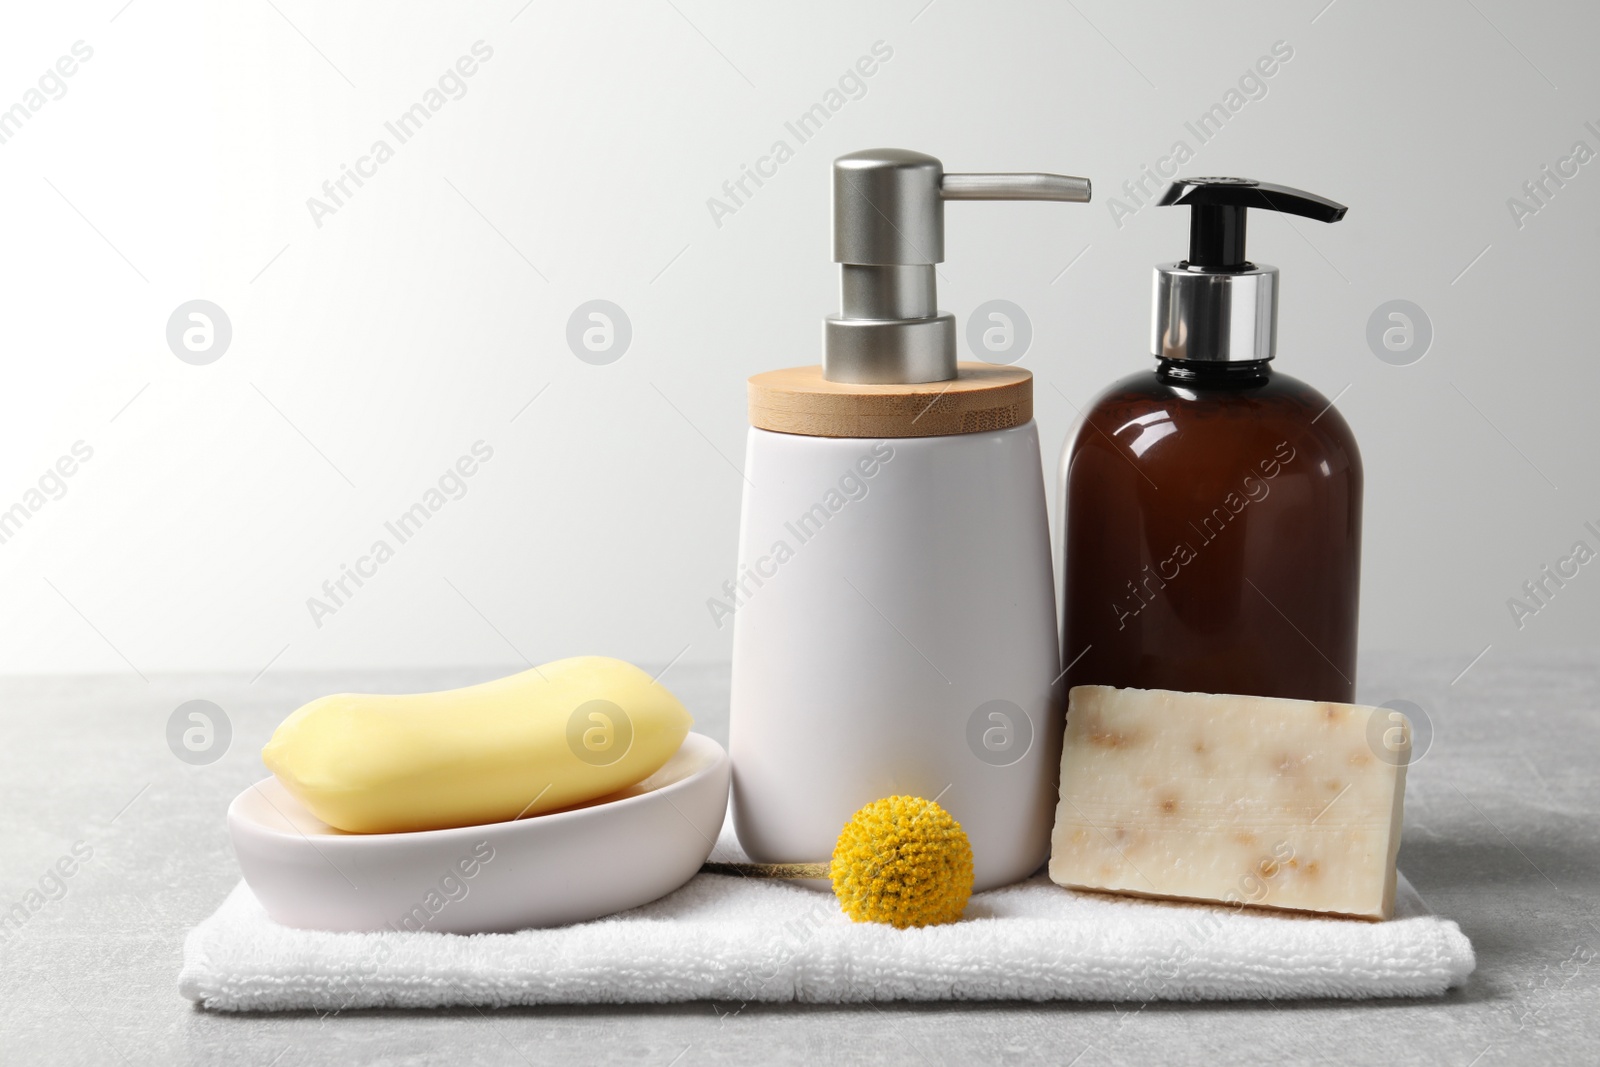 Photo of Soap bars, dispensers and terry towel on light grey table